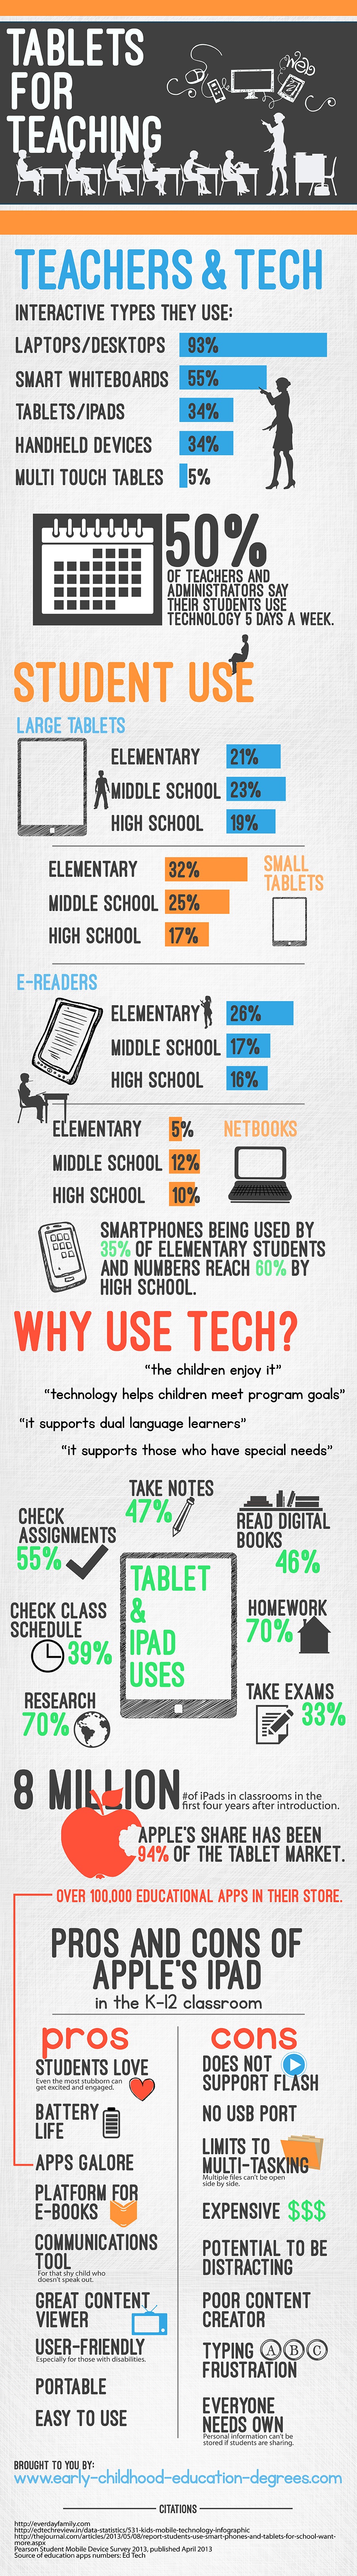 Tablets for Teaching Kids Infographic